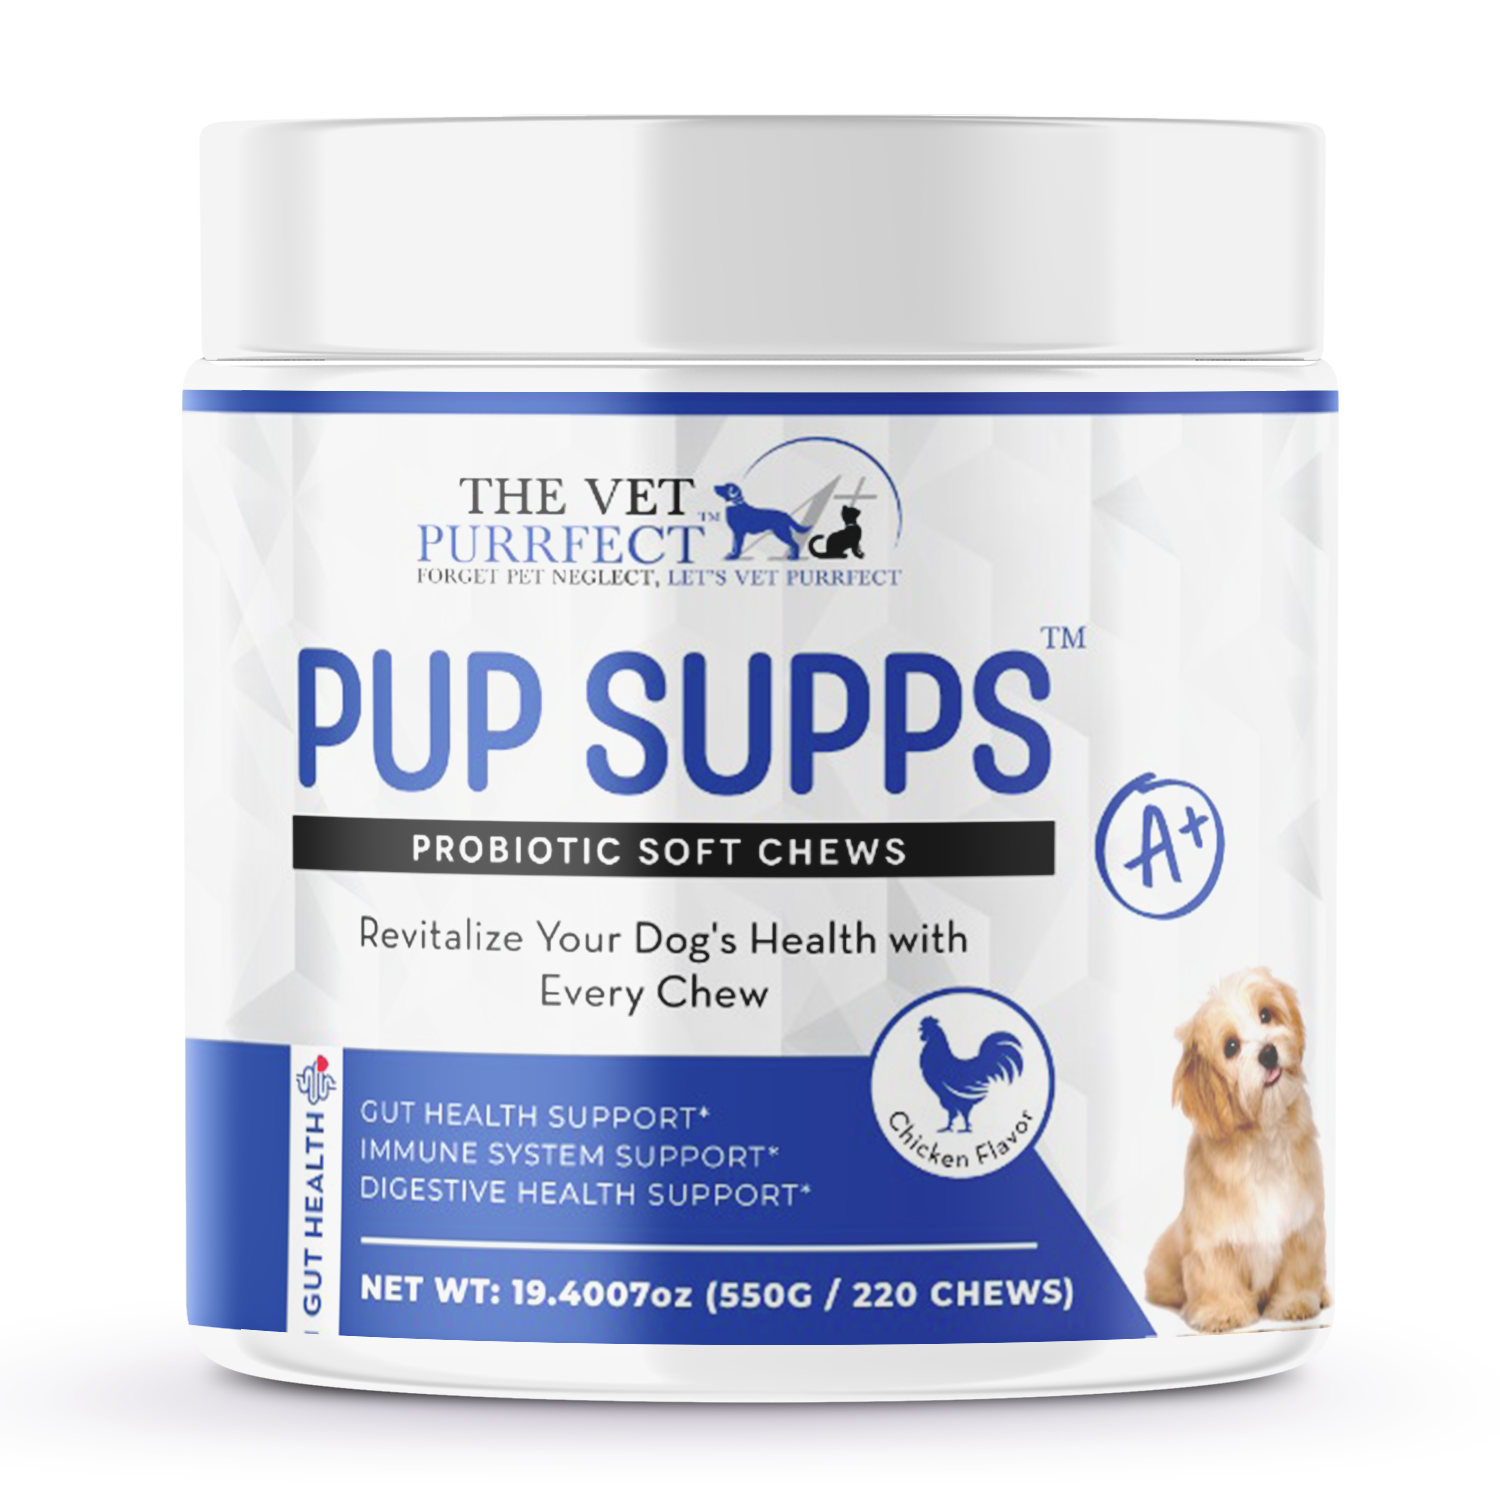 Vet Purrfect probiotic dog treat package with natural formula for digestive and gut health.